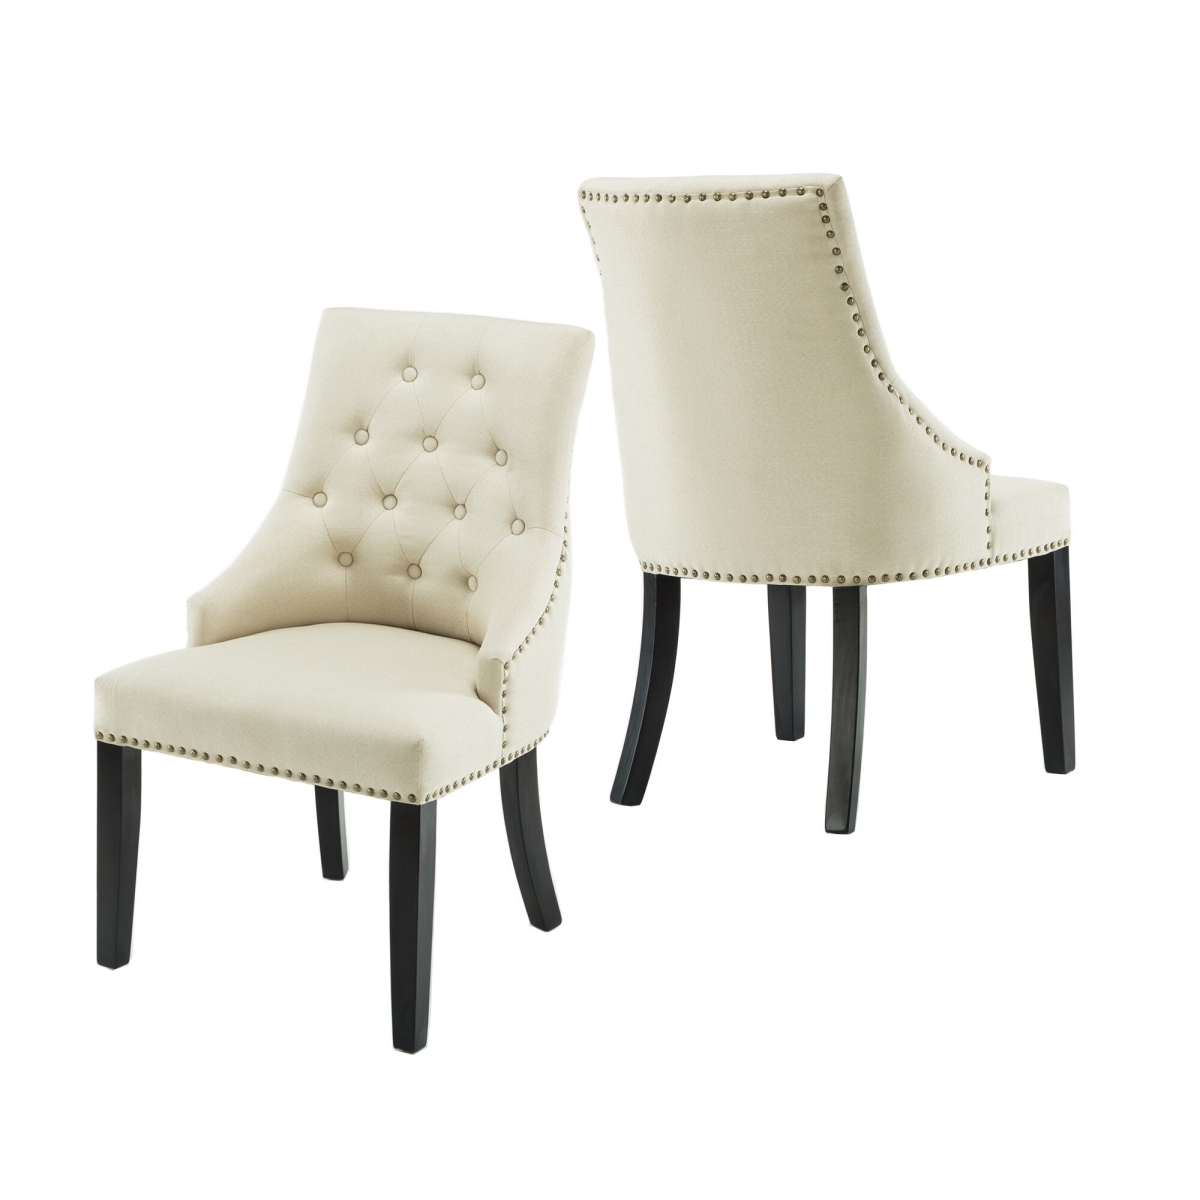 Lss-8229c01-beige Mid Back Button Tufted Fabric Dining Chair With Low-profile Armrest, Beige - Set Of 2